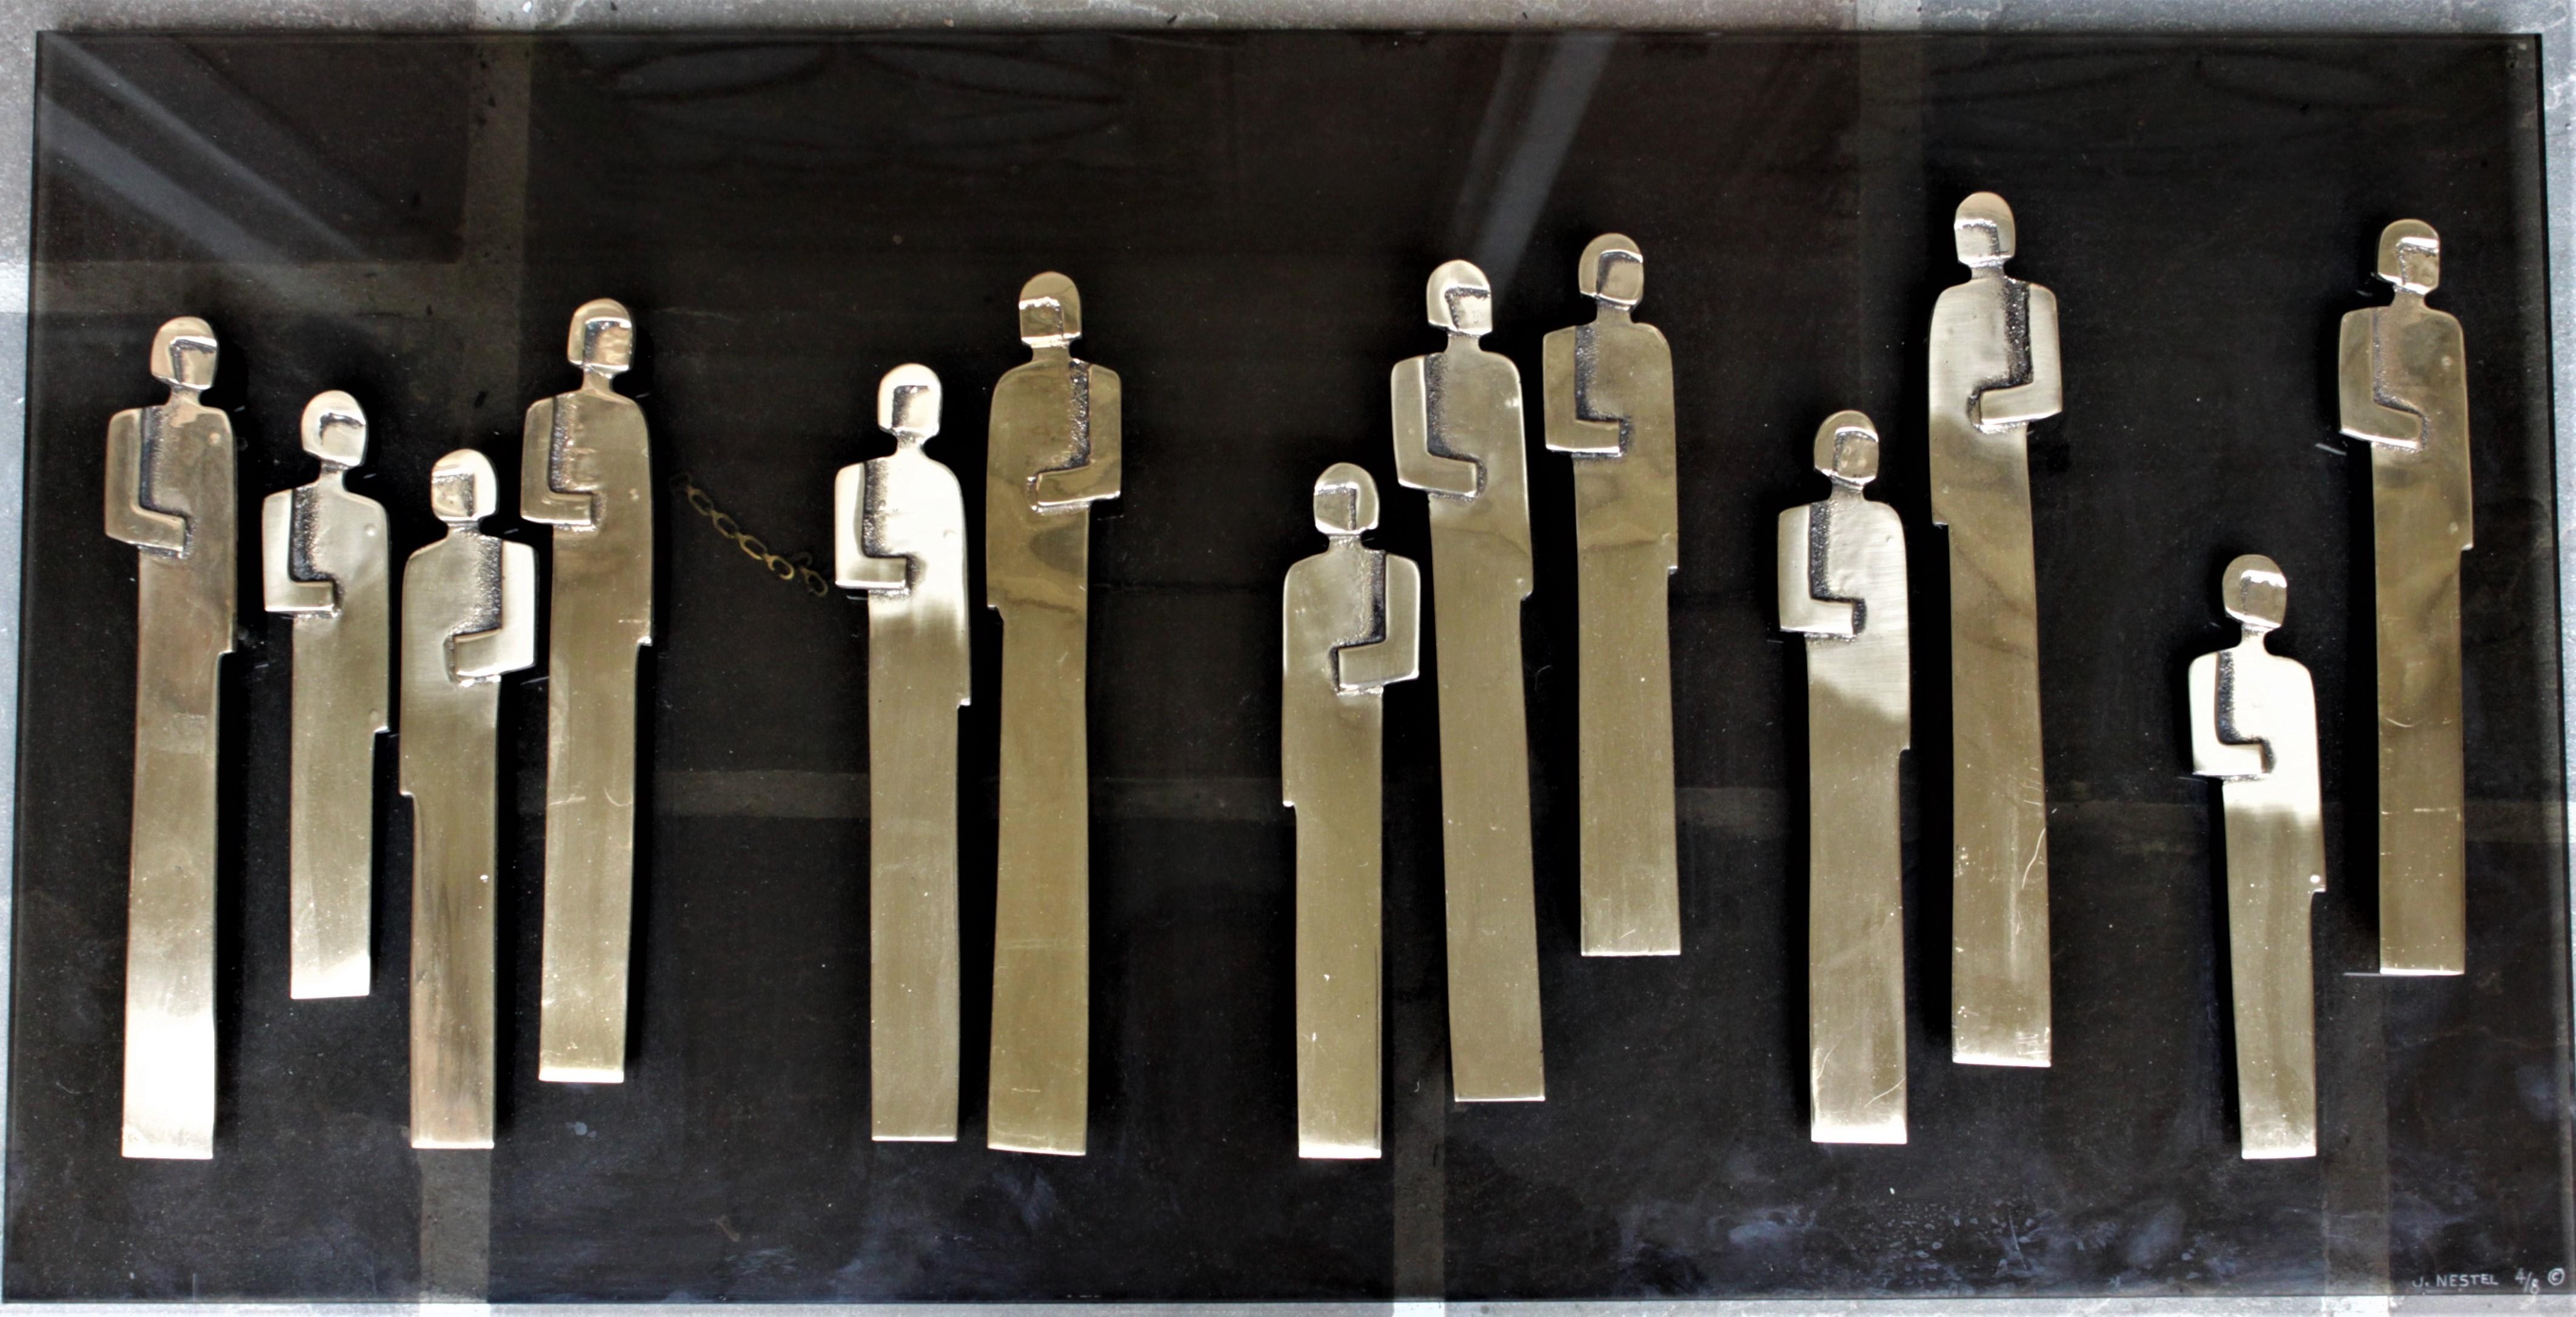 This Lucite and brass wall sculpture is not dated, but presumed to have been made in approximately the 1970s by Canadian artist, Jeannette Nestel. The sculpture features several stylized people done in brass, which are mounted to a thick piece of